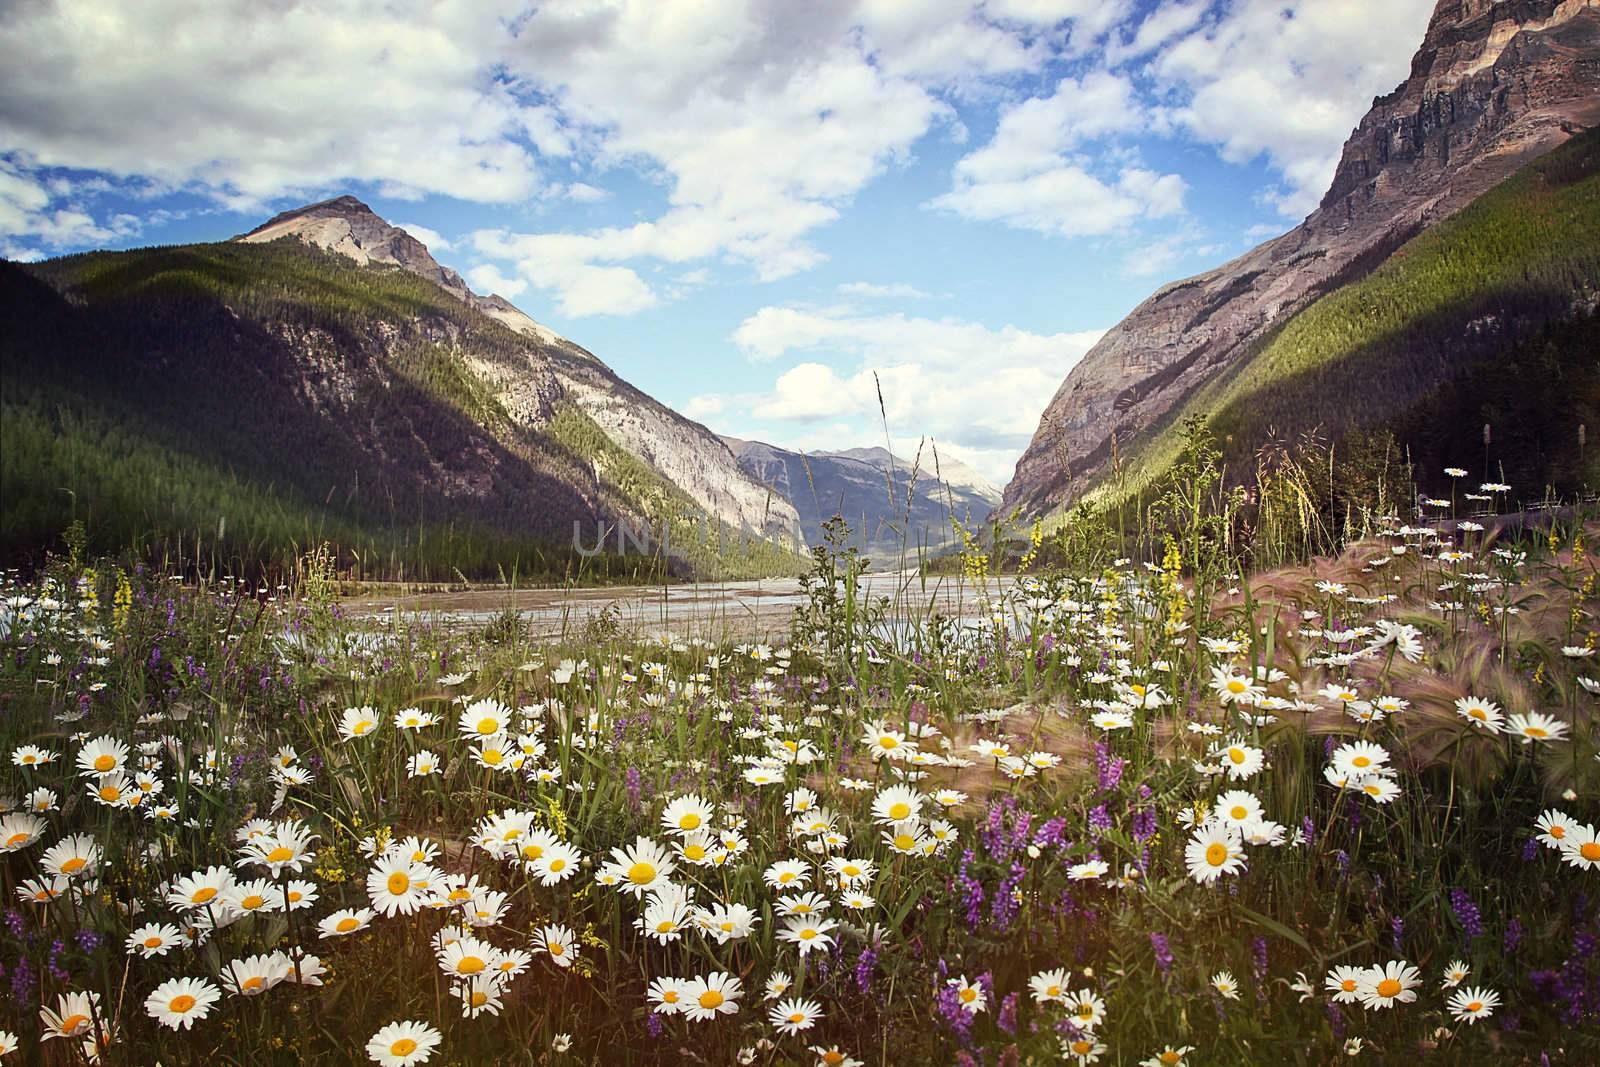 Field of wild flowers with Rocky Mountains in background by Sandralise